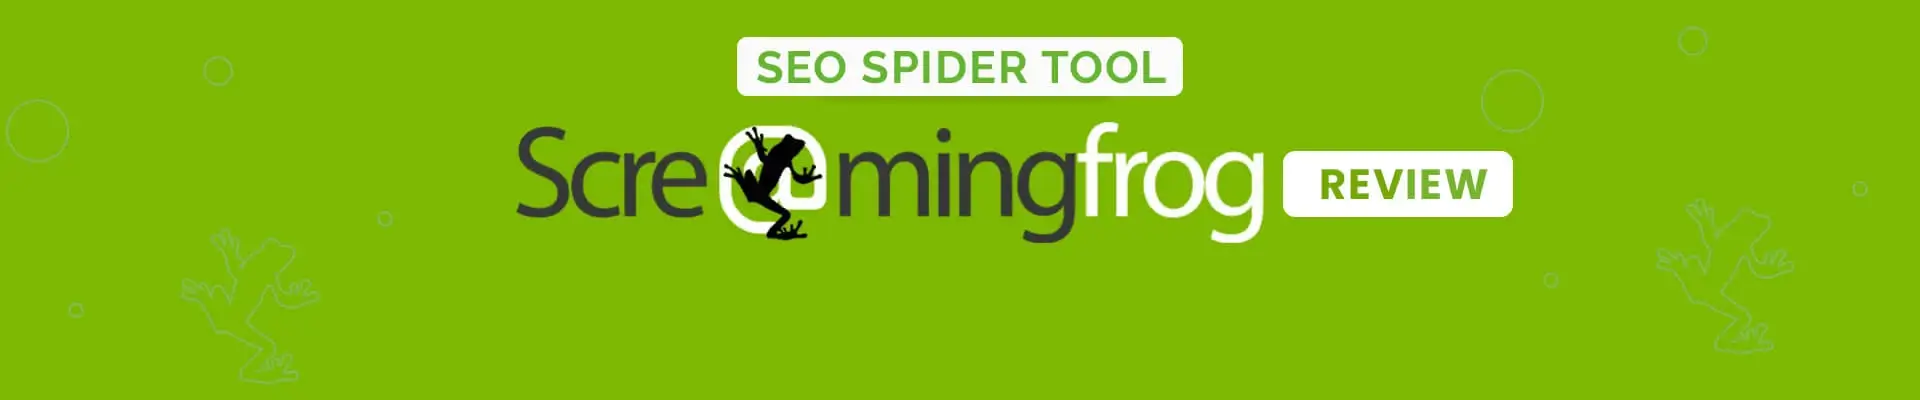 Screaming frog SEO spider